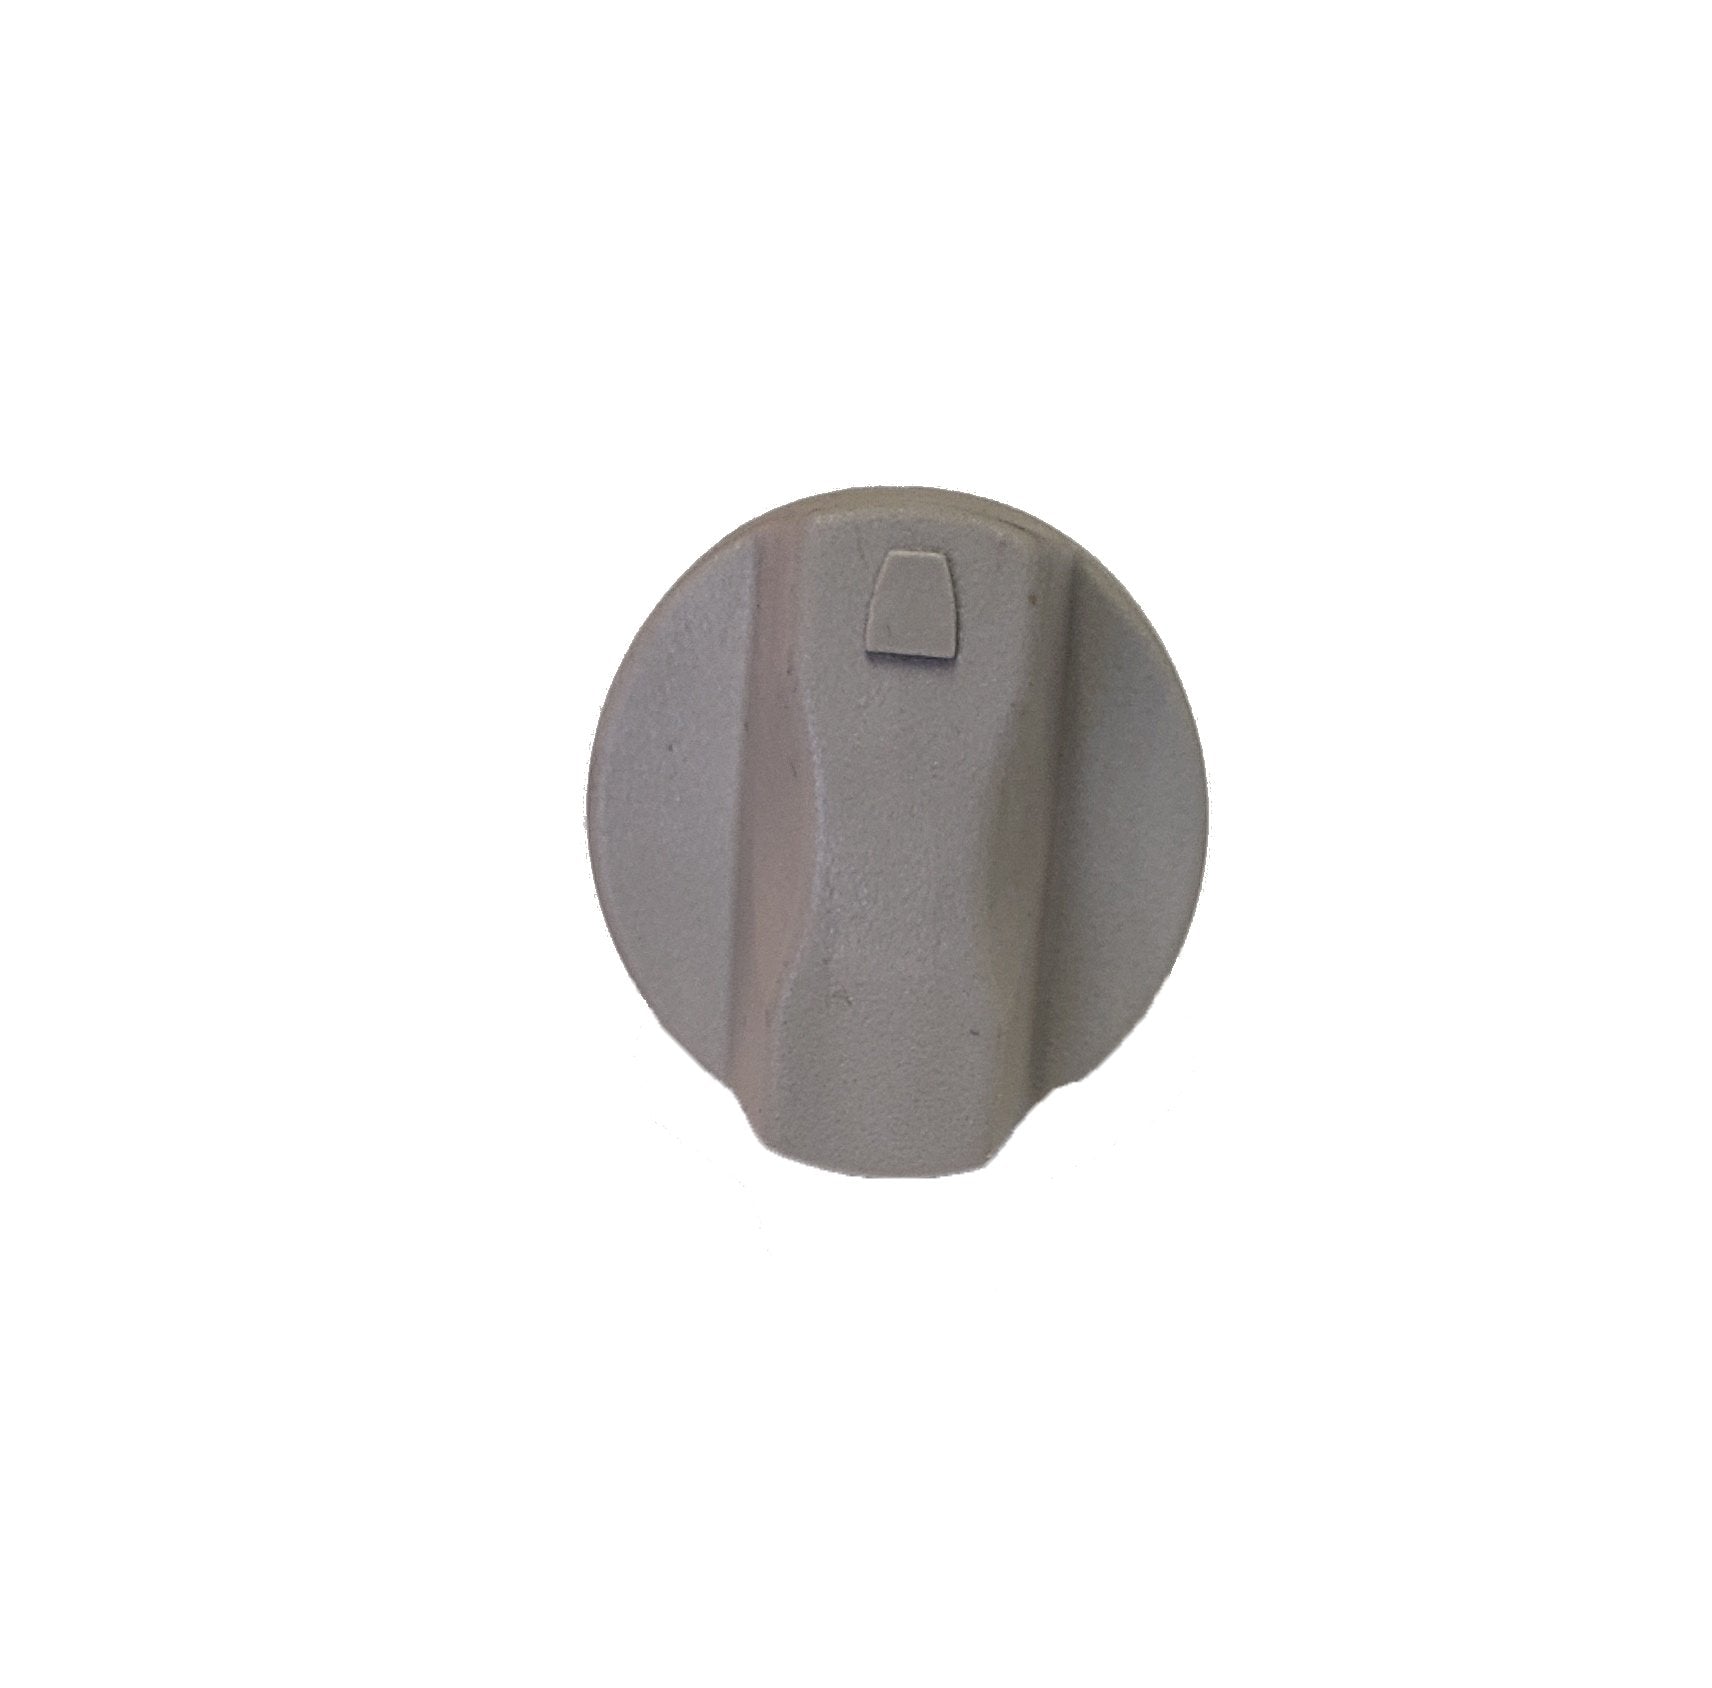 Weber 78960 Replacement Control Knob | Be ready for grilling season and order your replacement control knobs now! Available in-store and online with Barbecues Galore: Burlington, Oakville, Etobicoke & Calgary.